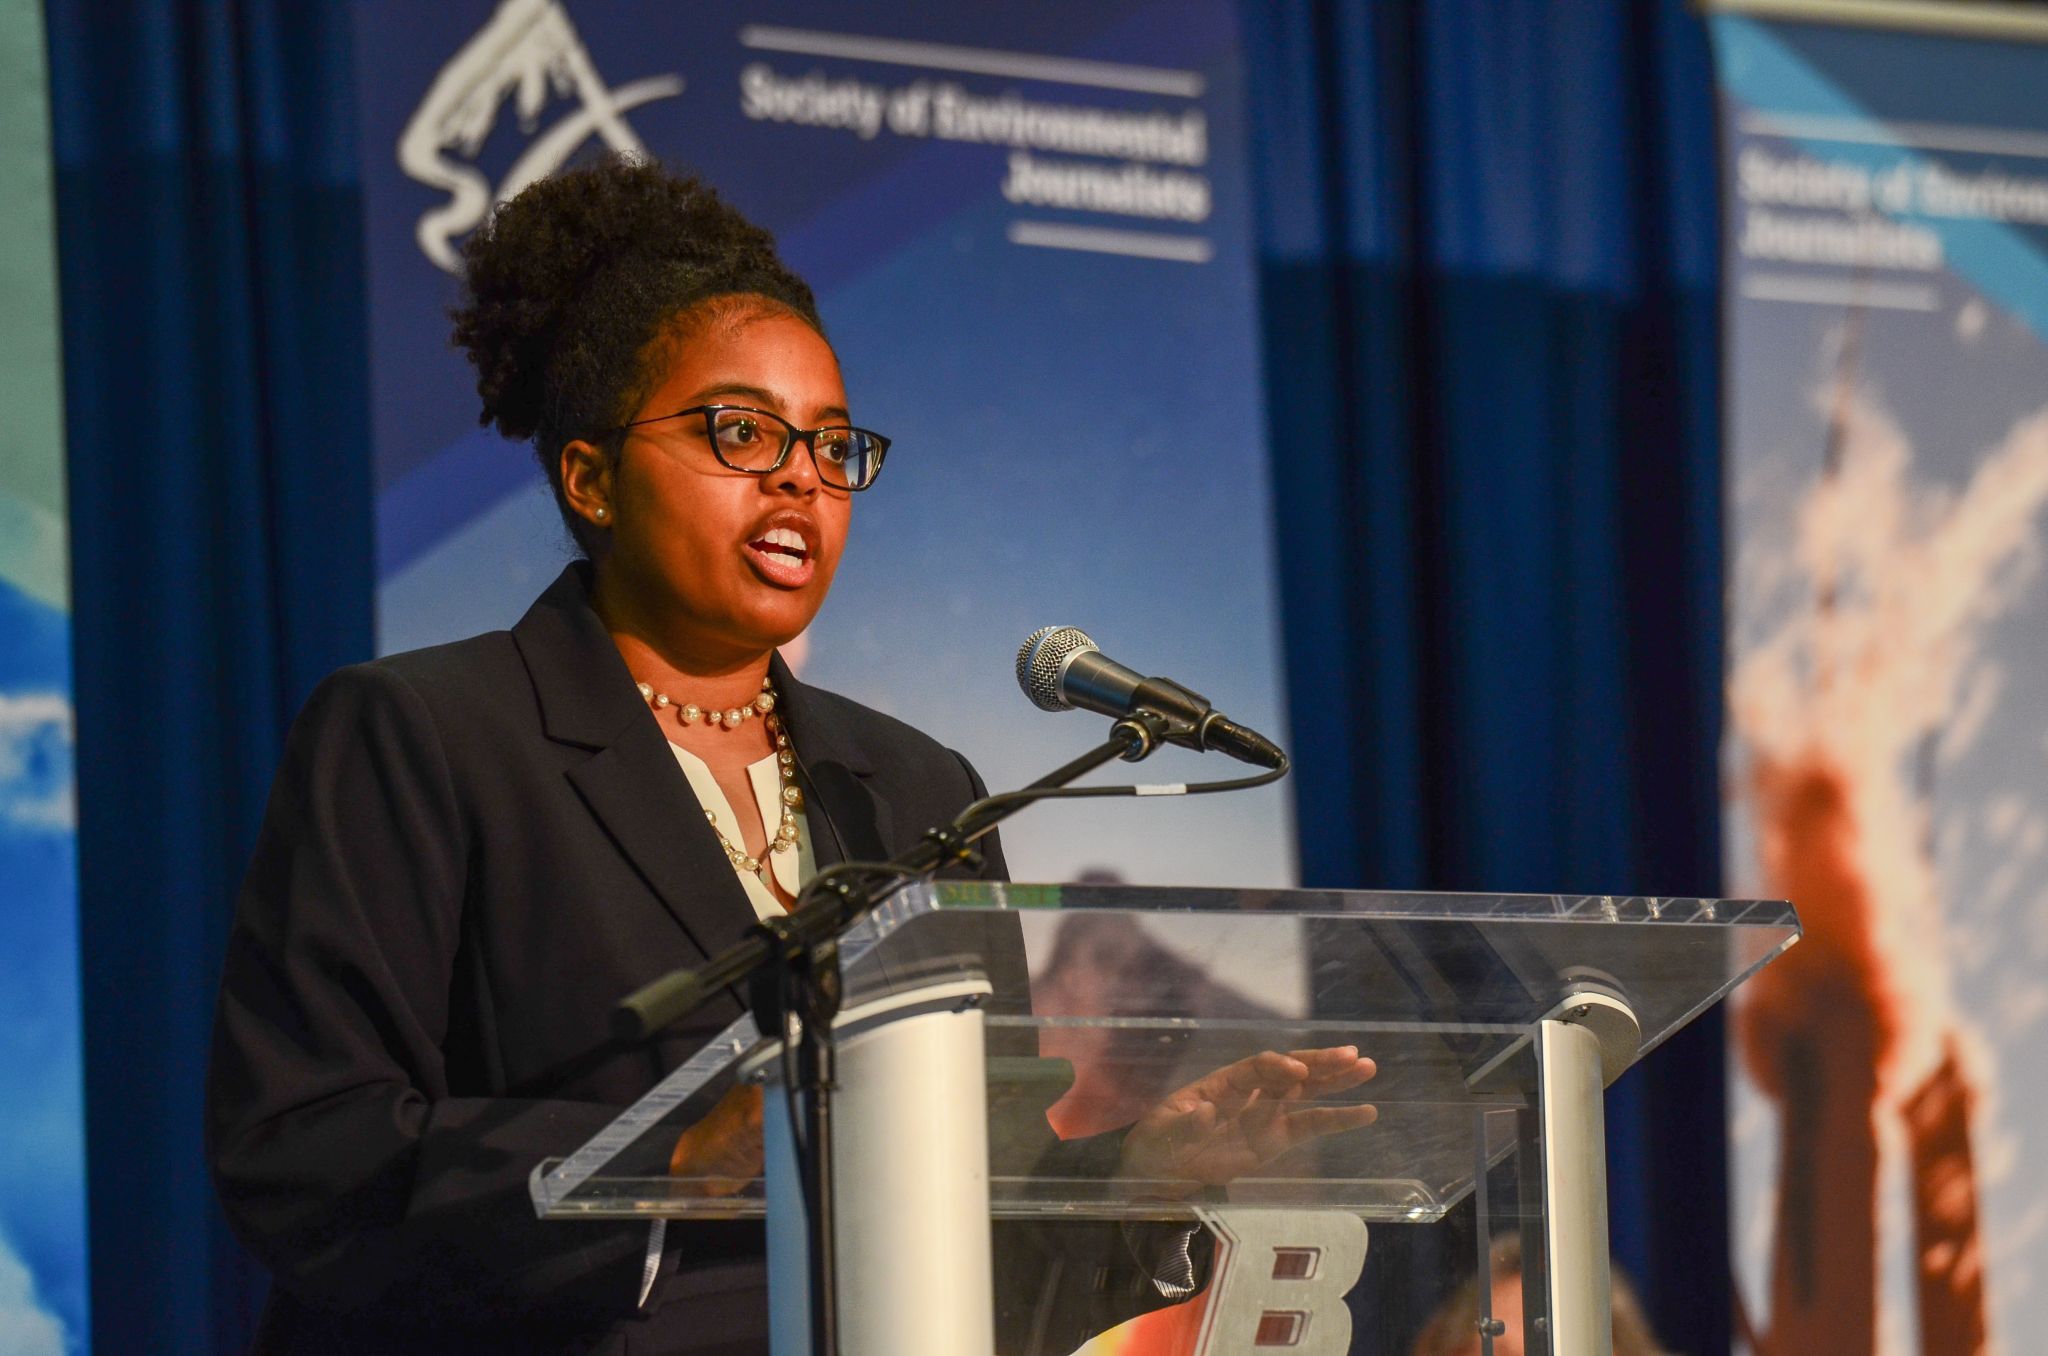 Cameron speaking at the 2023 Society of Environmental Journalist Conference as the First Place recipient of the Outstanding Student Journalism Award for her coverage of environmental racism in North Carolina.